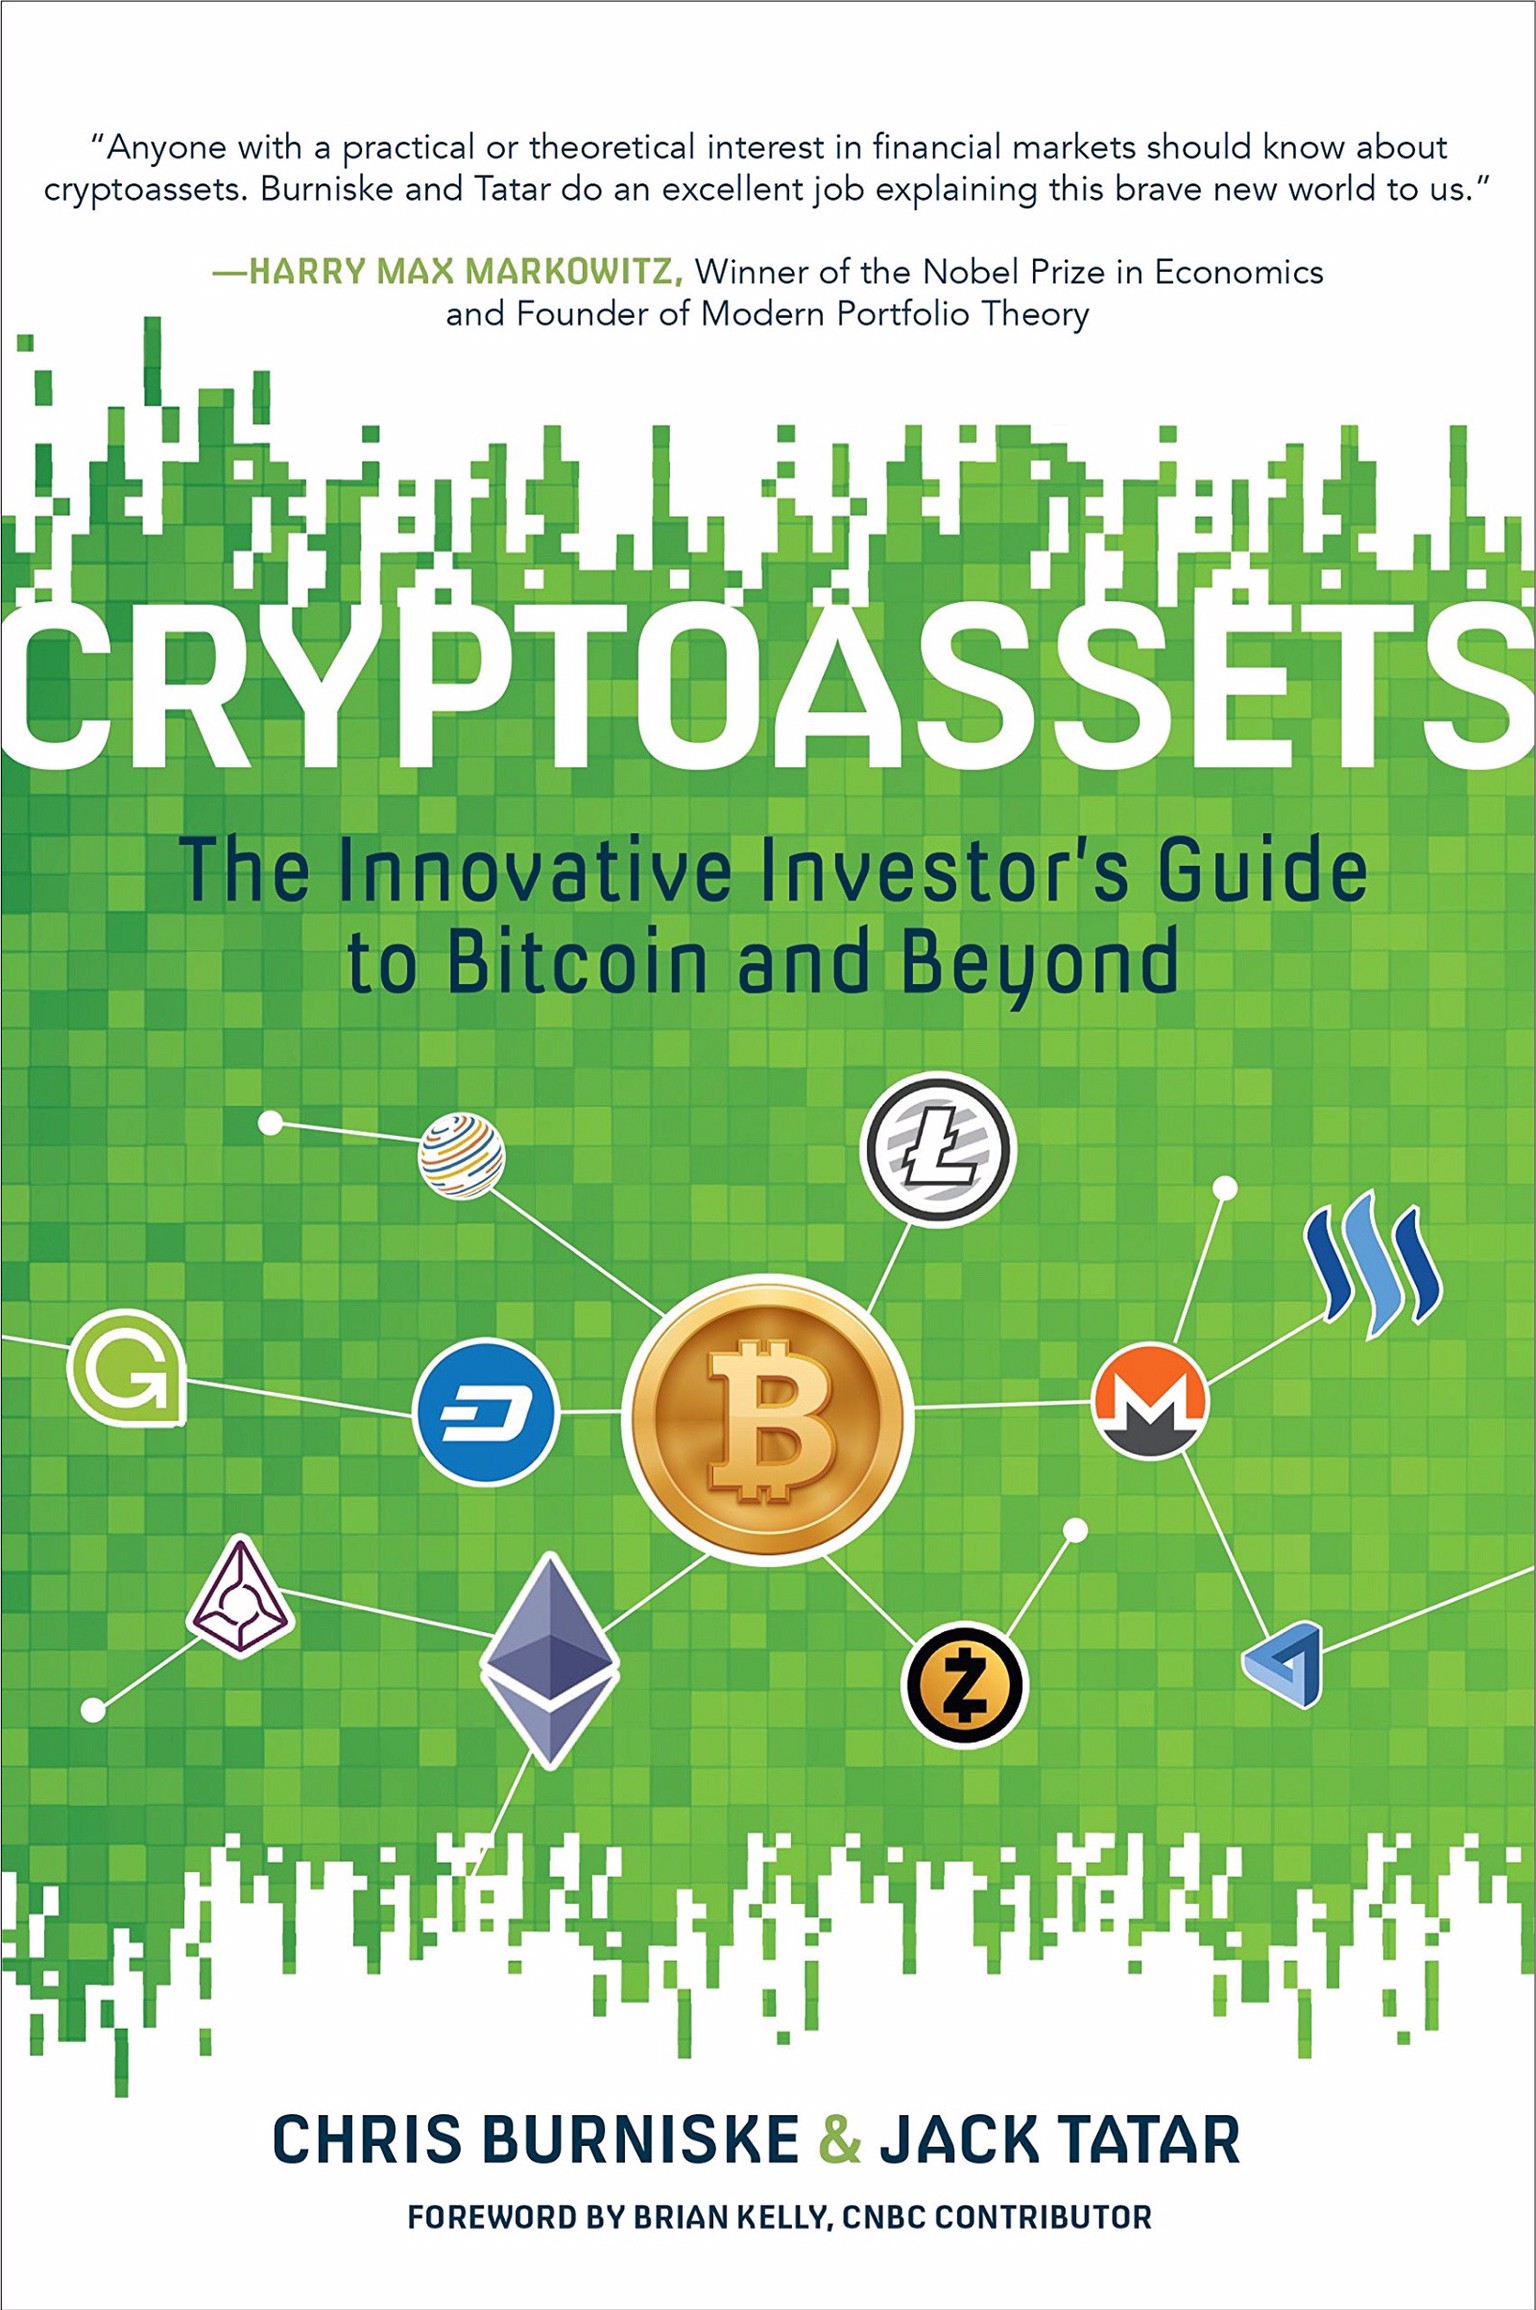 Chris Burniske and Jack Tatar «Cryptoassets: The Innovative Investor's Guide to Bitcoin and Beyond»